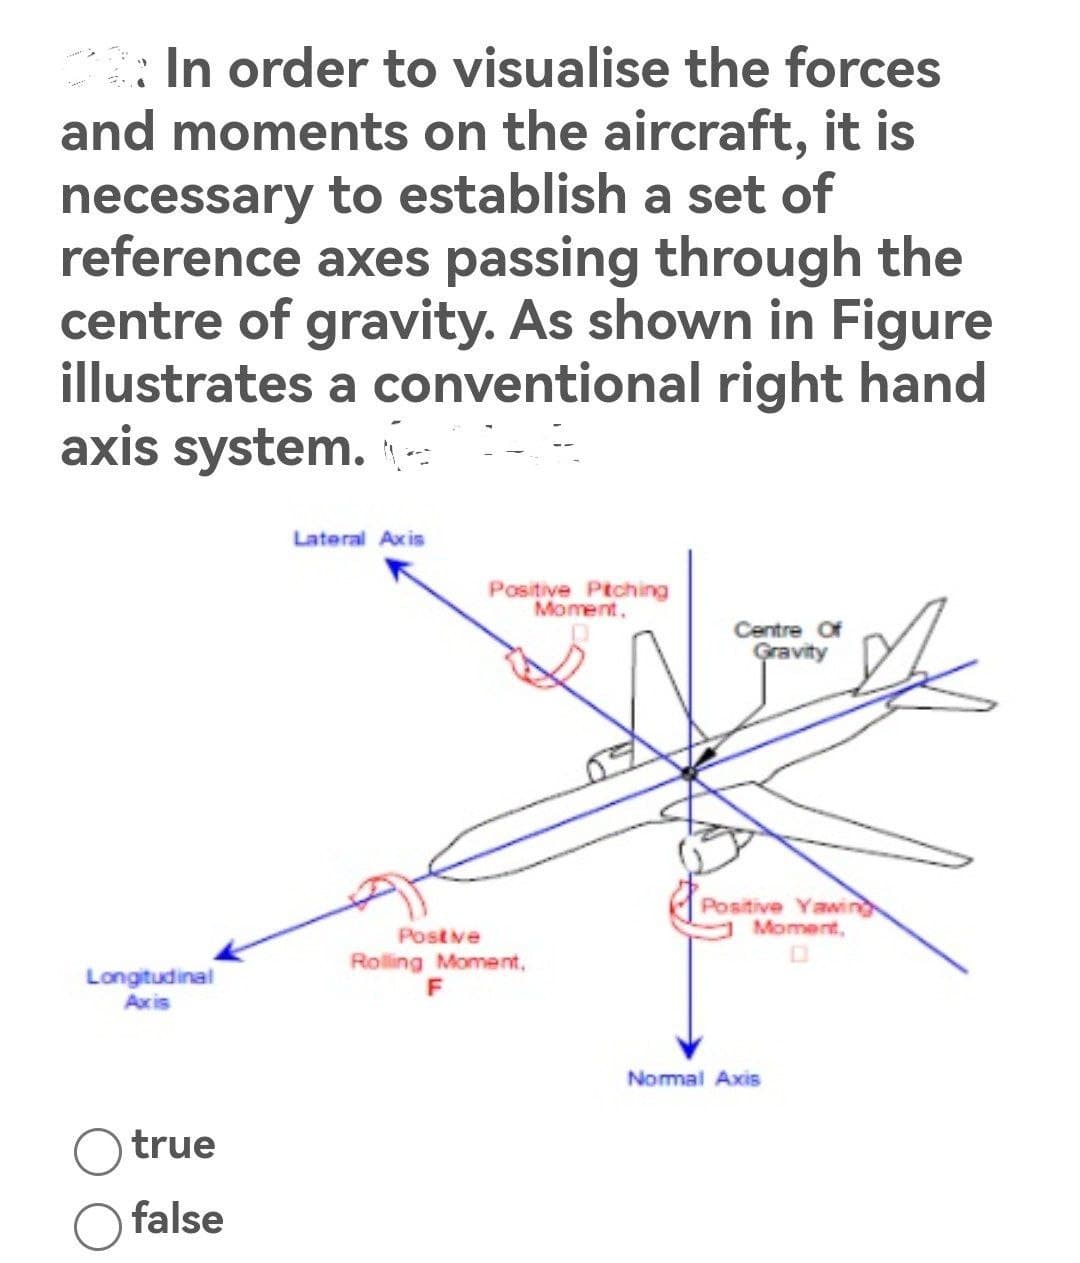 In order to visualise the forces
and moments on the aircraft, it is
necessary to establish a set of
reference axes passing through the
centre of gravity. As shown in Figure
illustrates a conventional right hand
axis system.
Lateral Axis
Positive Ptching
Moment.
Centre Of
Gravity
Positive Yawing
Moment,
Longitudinal
Axis
true
false
Postive
Rolling Moment,
F
Normal Axis